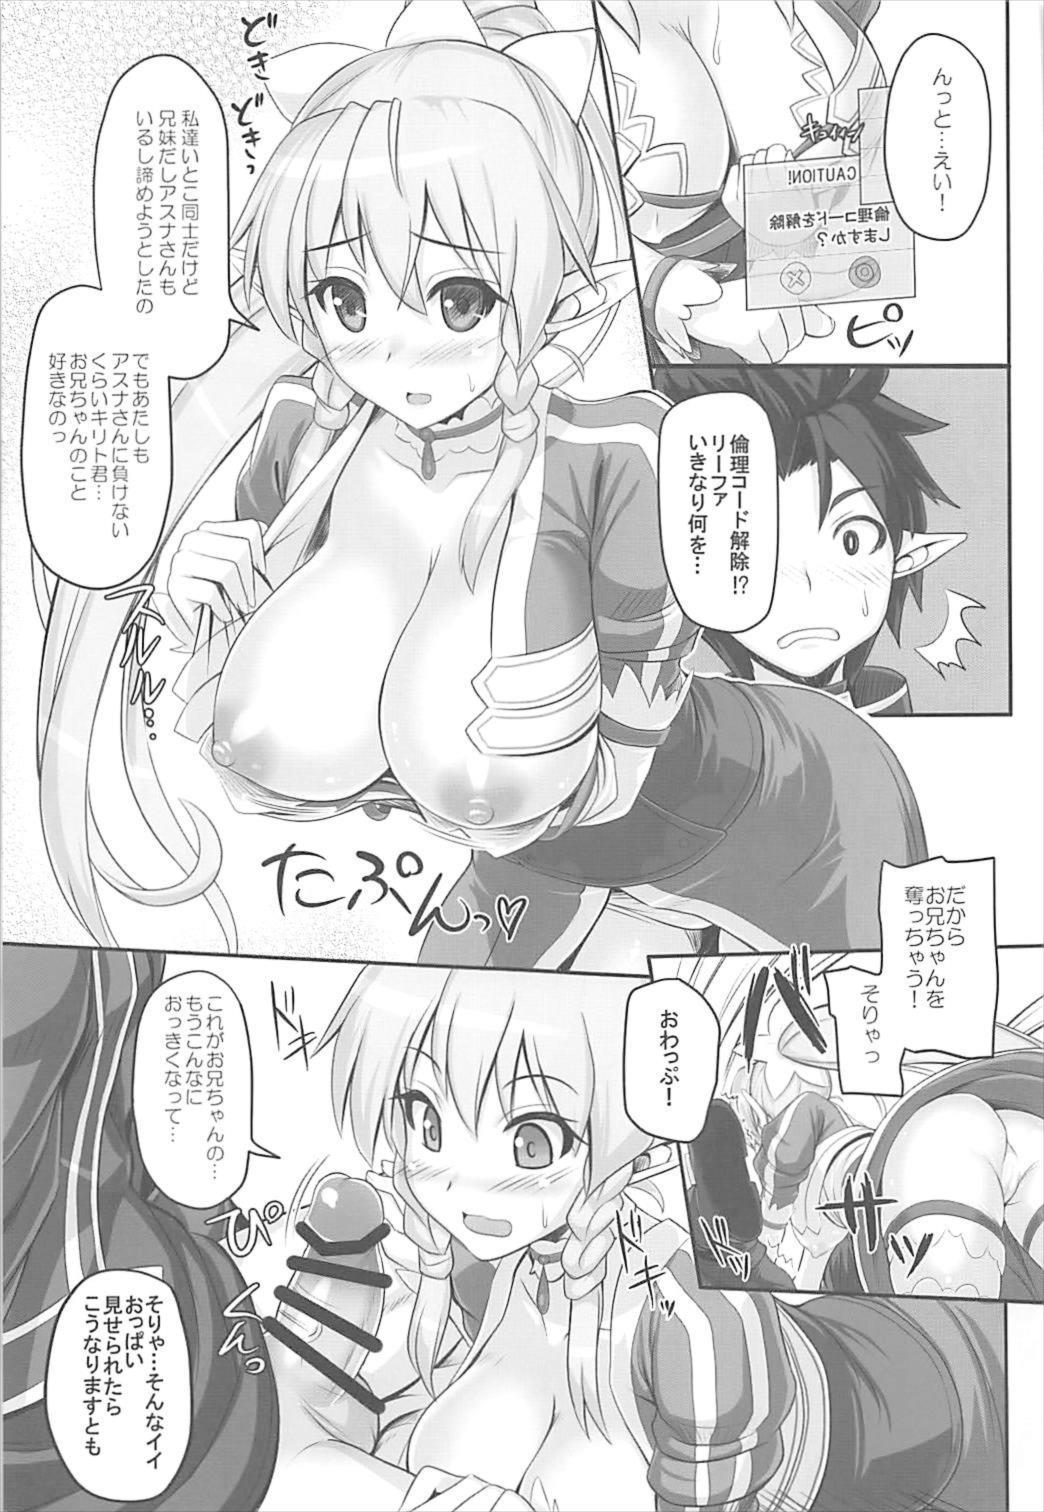 Tight Cunt Sister Affection On&Off SAO Soushuuhen - Sword art online Boob - Page 8